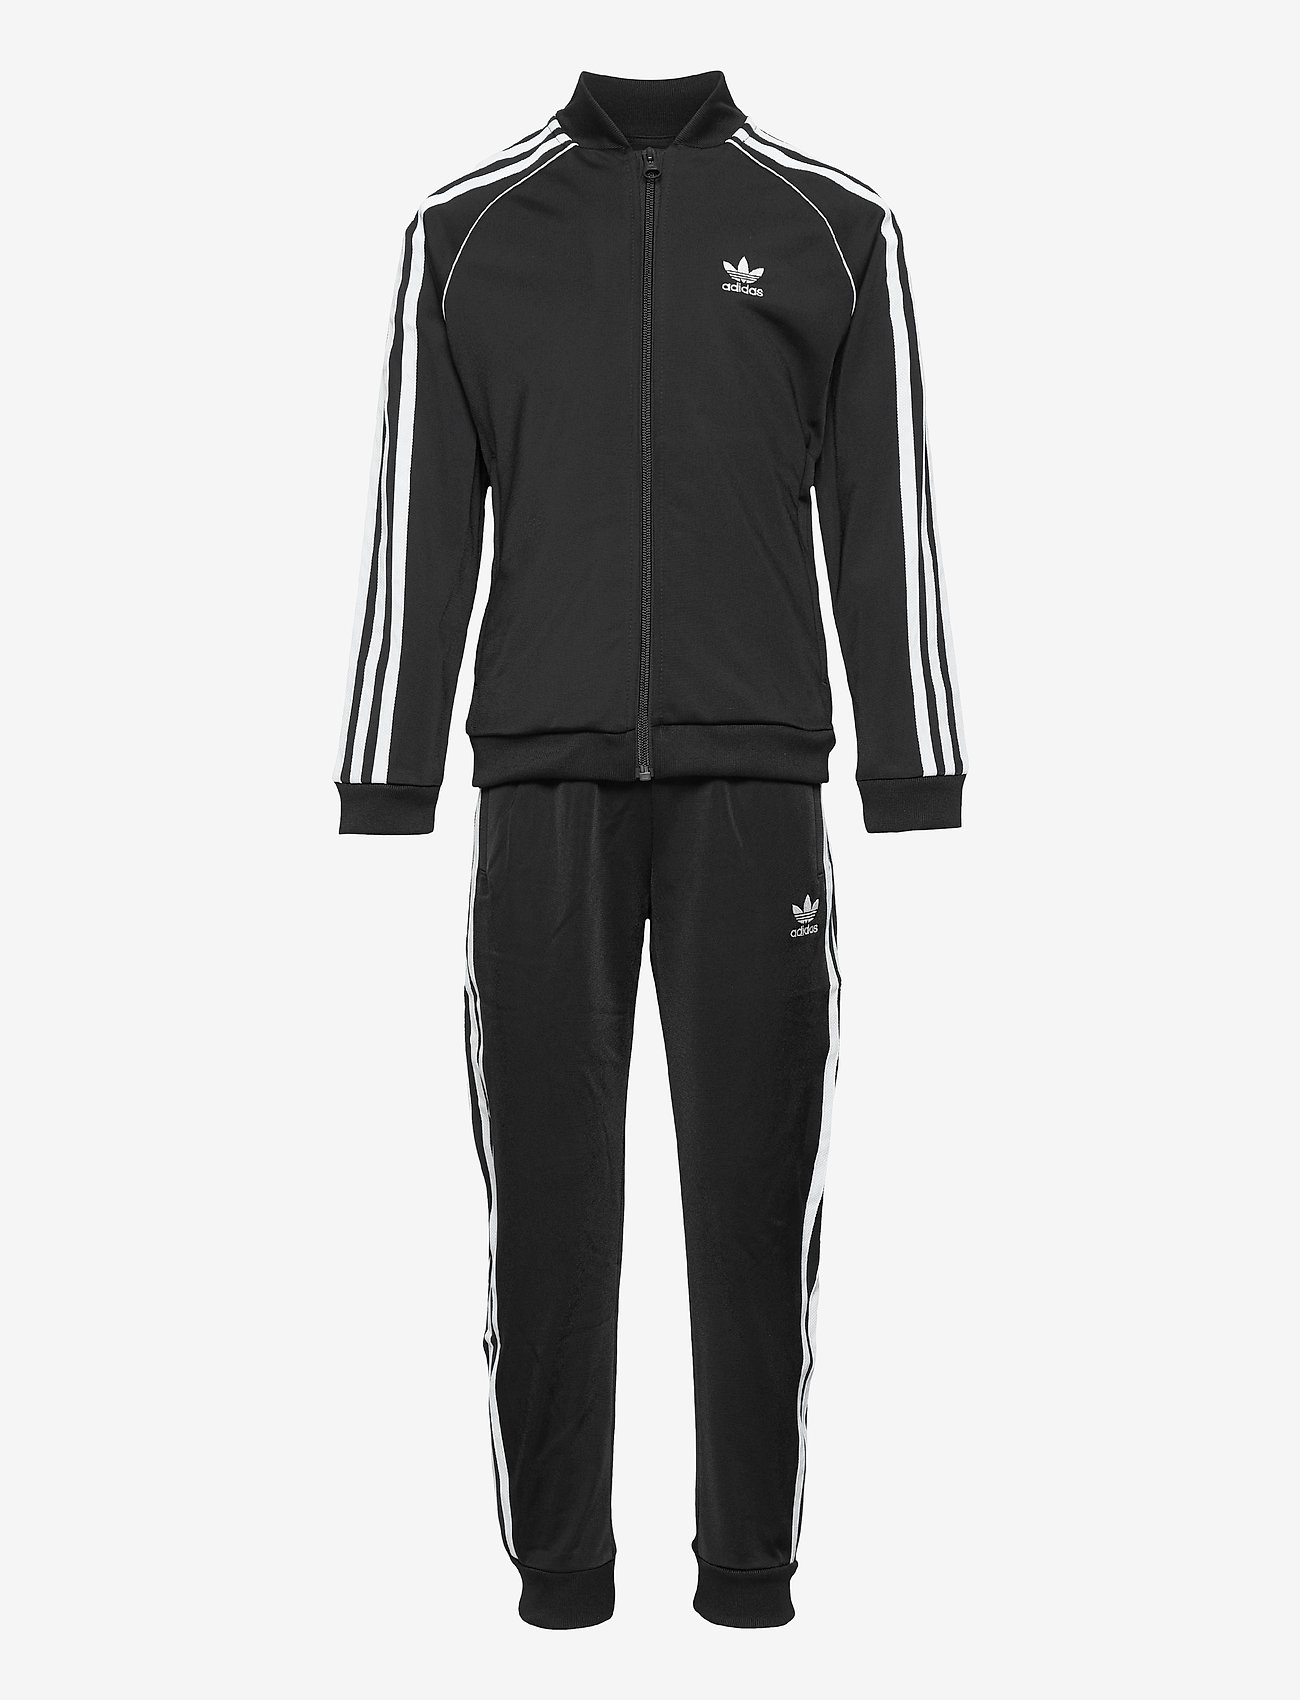 black and white adidas suit